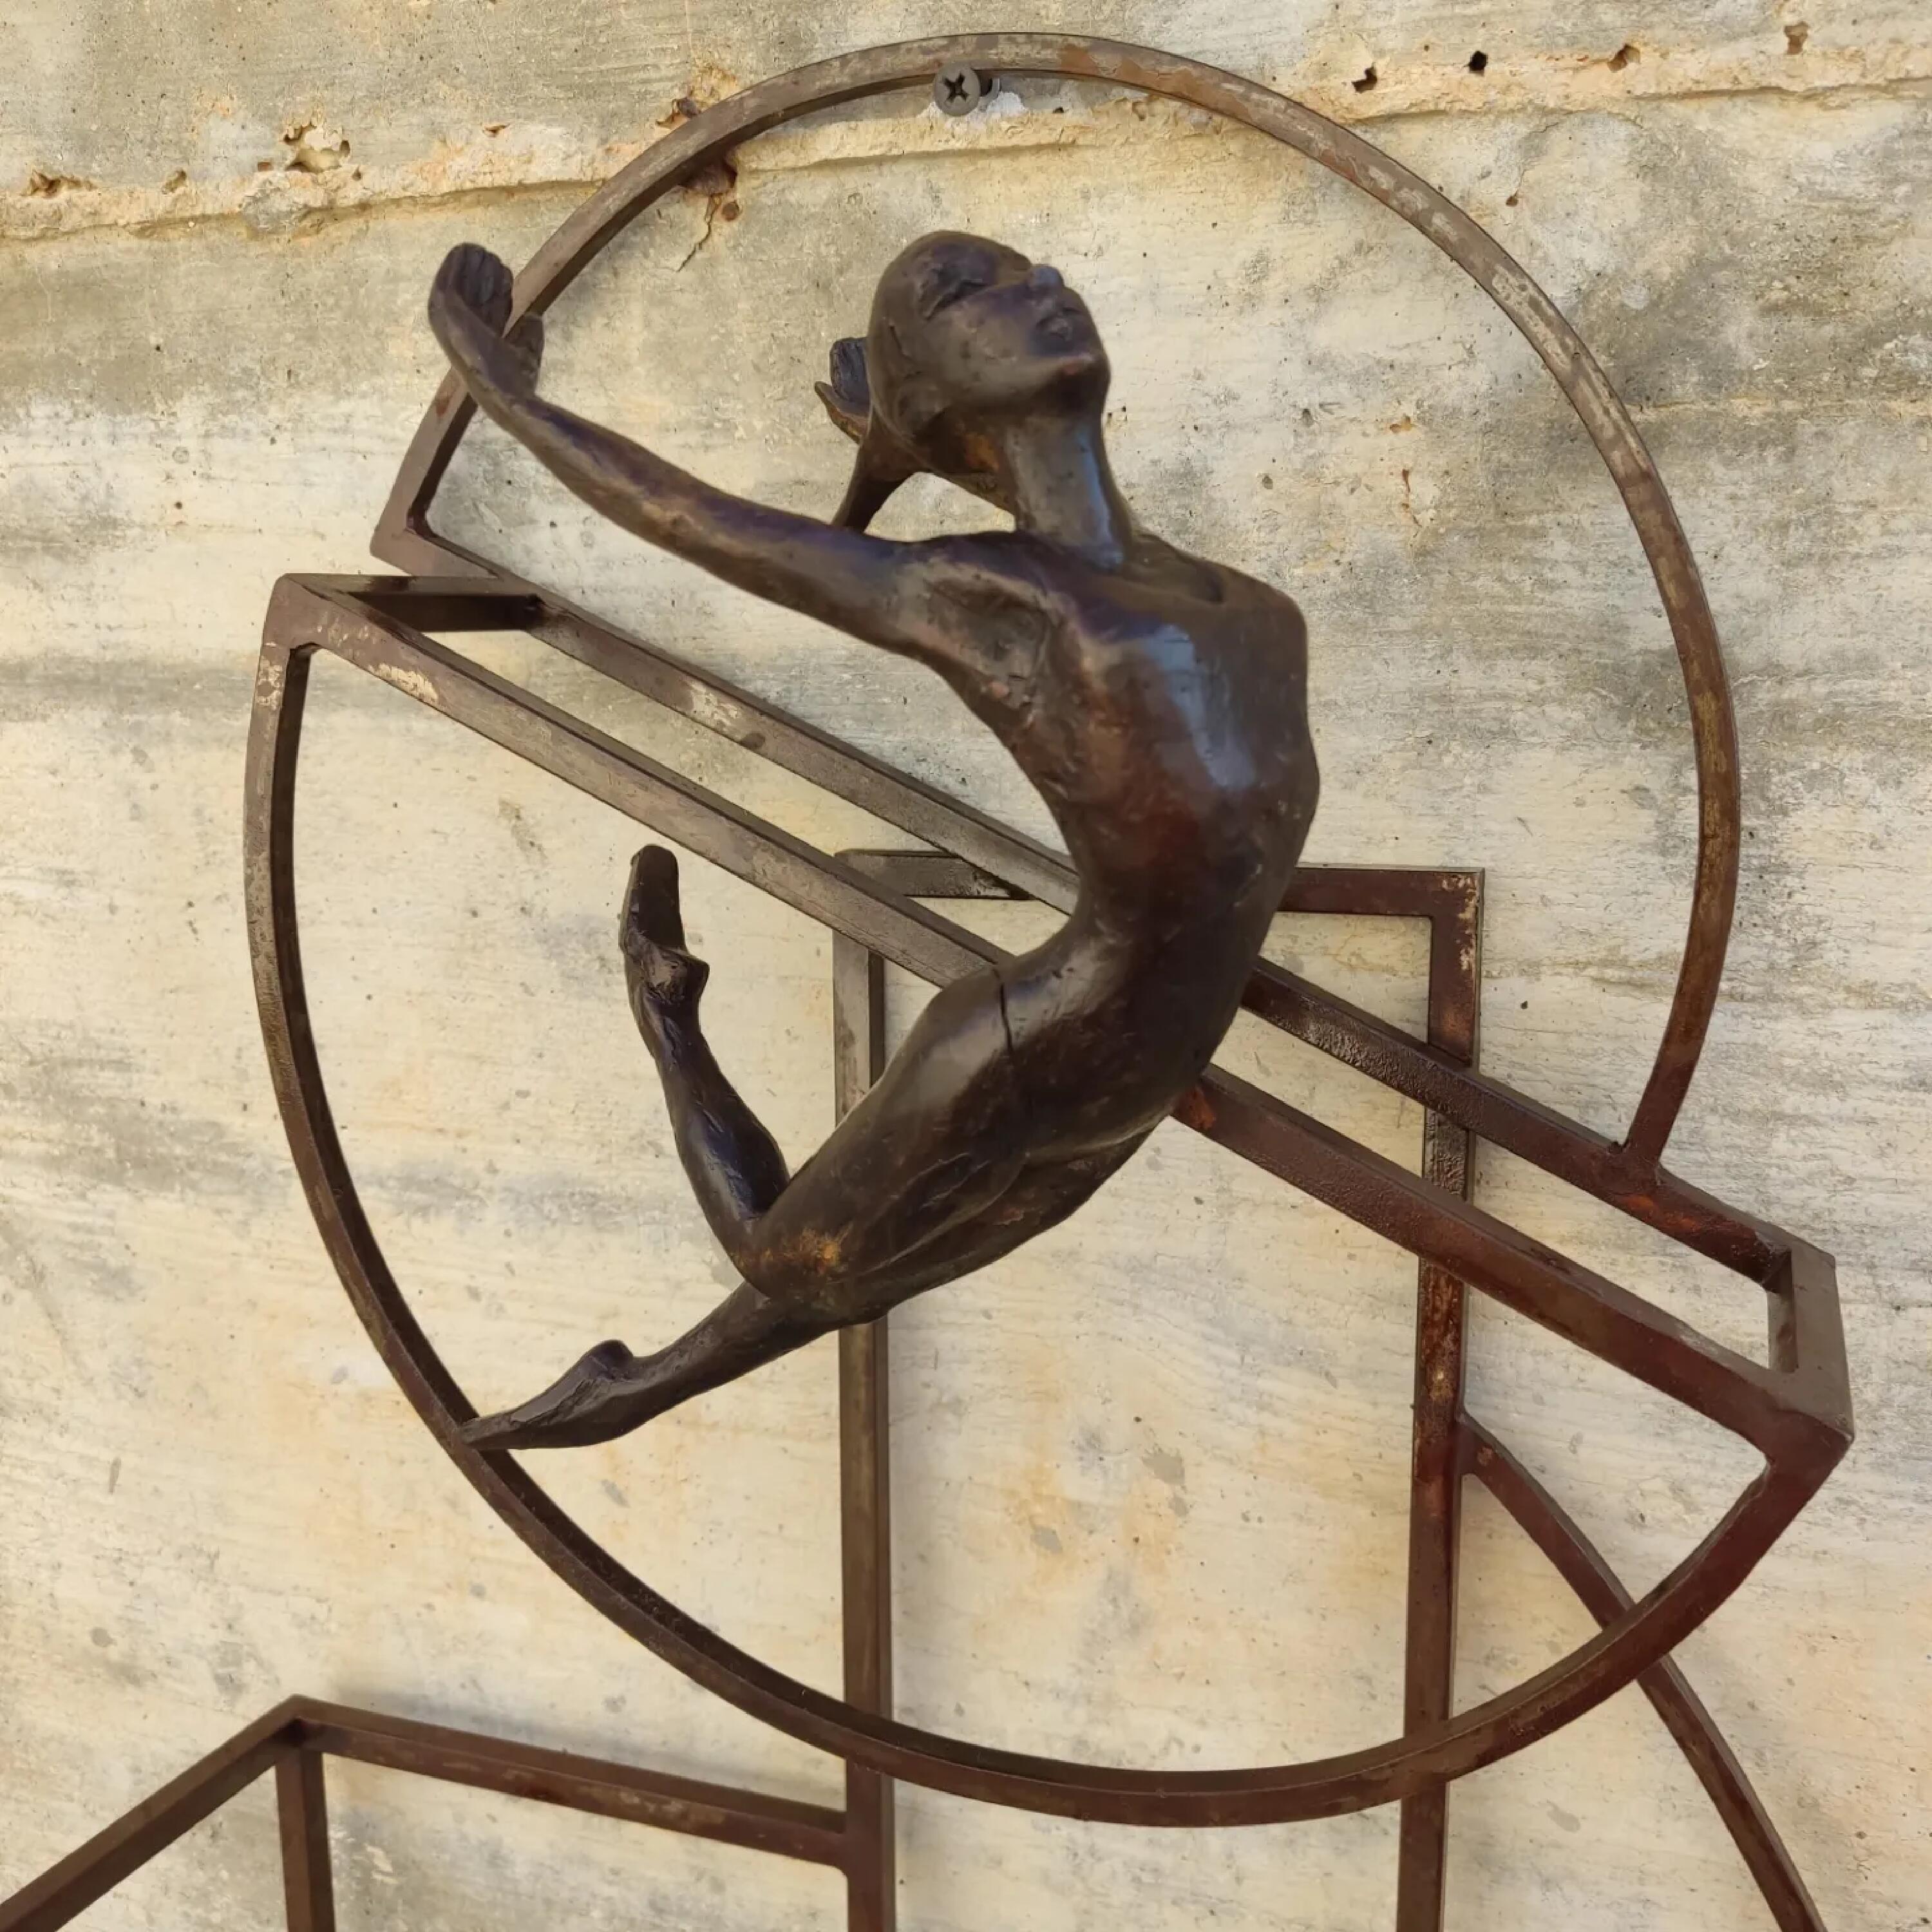 Hop is bronze sculpture wall table sculpture, it is connected to a steel base. The sculpture depicts human figures in a dynamic pose, as if caught in mid-movement.  The Dynamic composition of the sculpture gives the impression of being caught in a